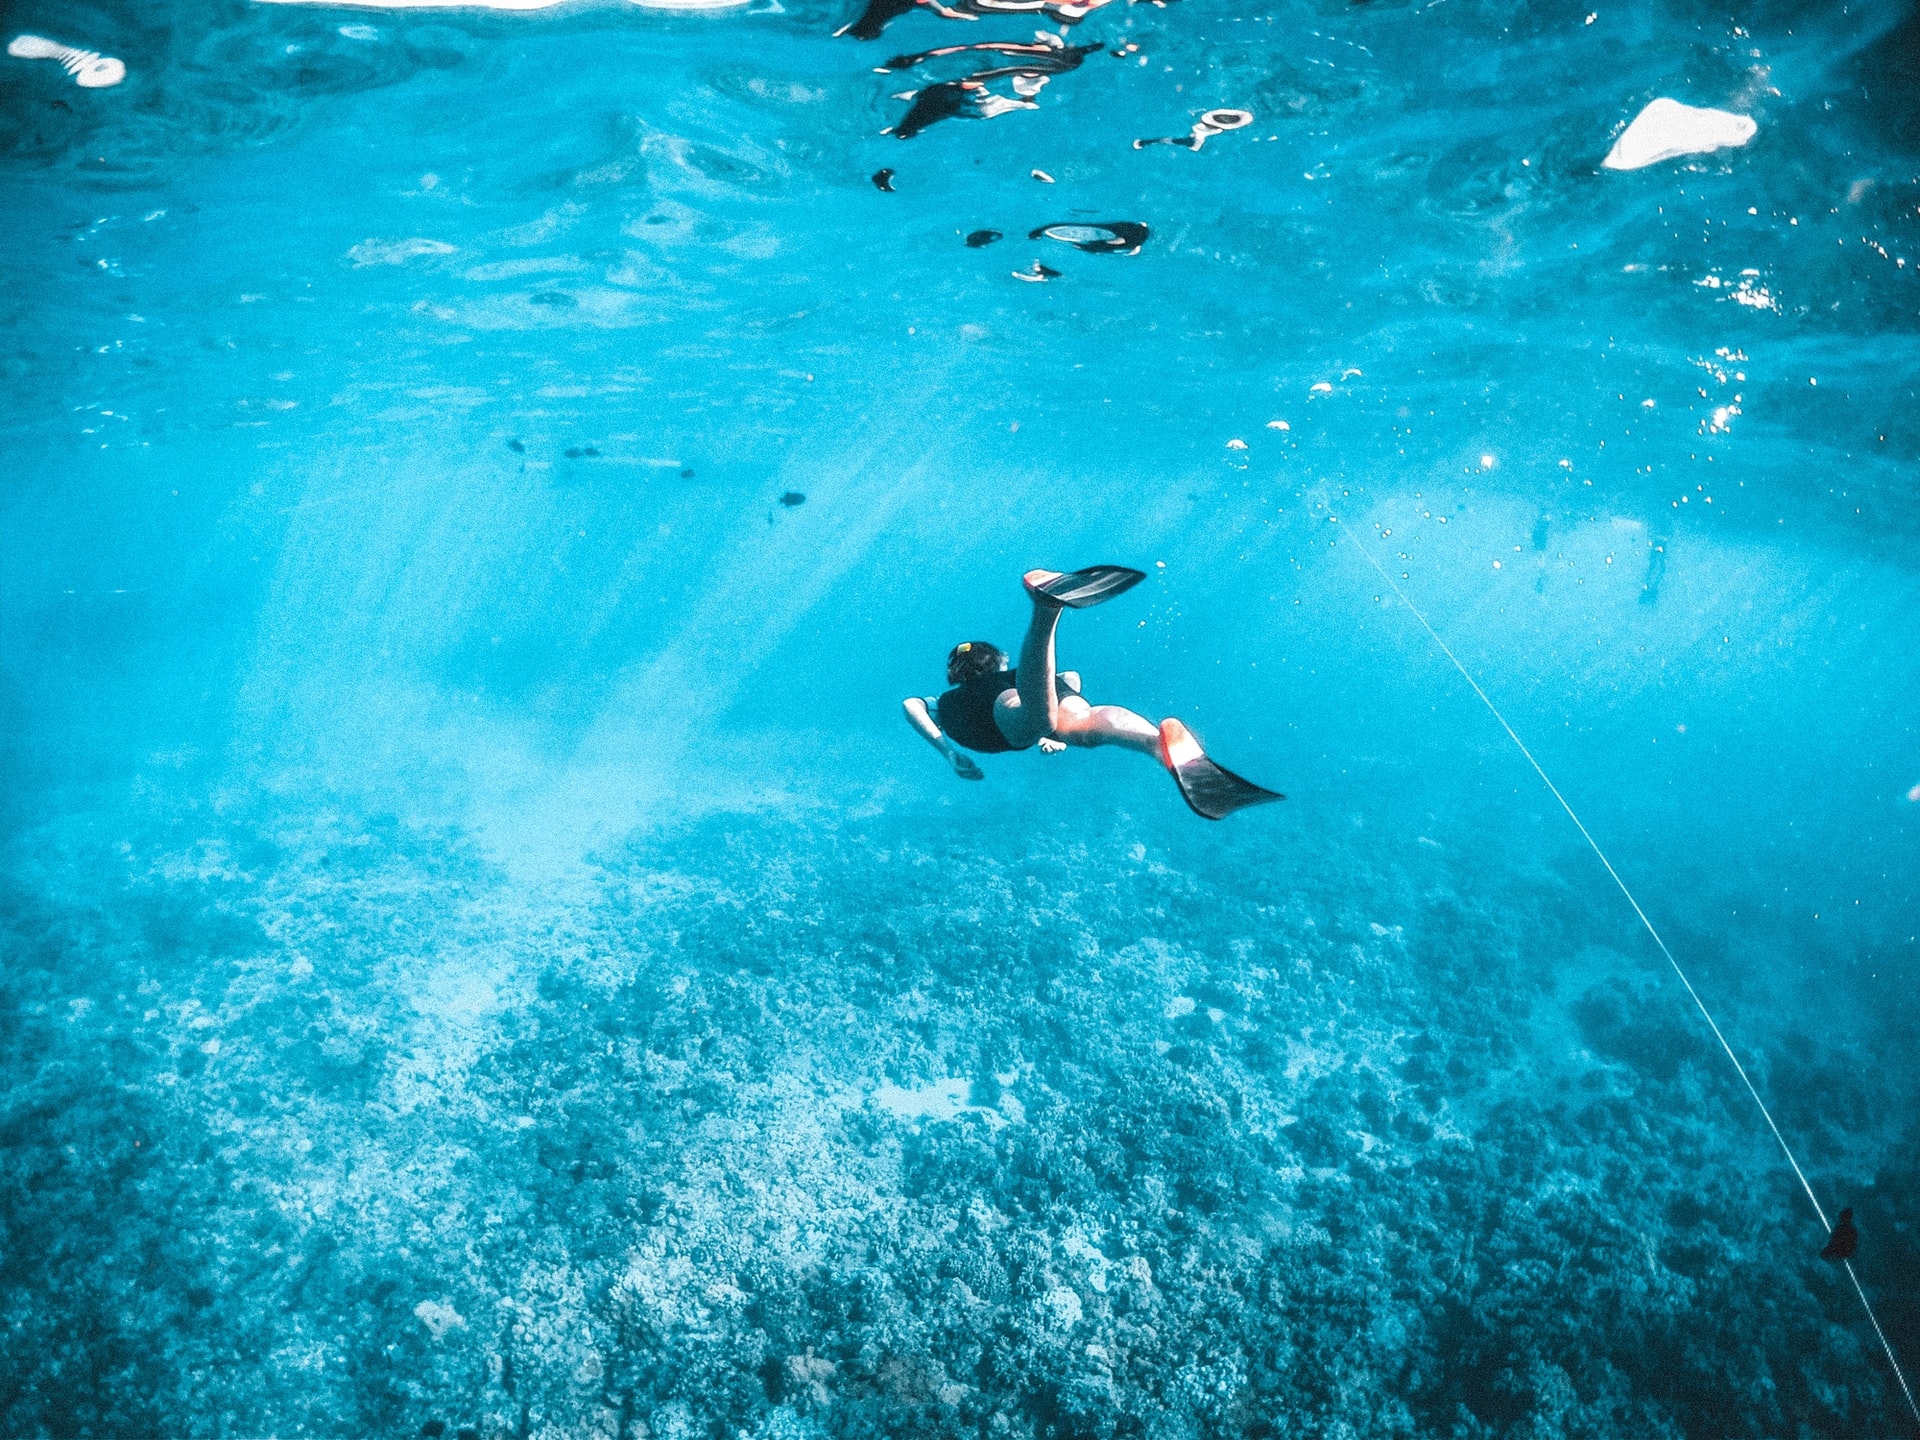 Do You Need To Know How To Swim To Snorkel? With 6 Tips